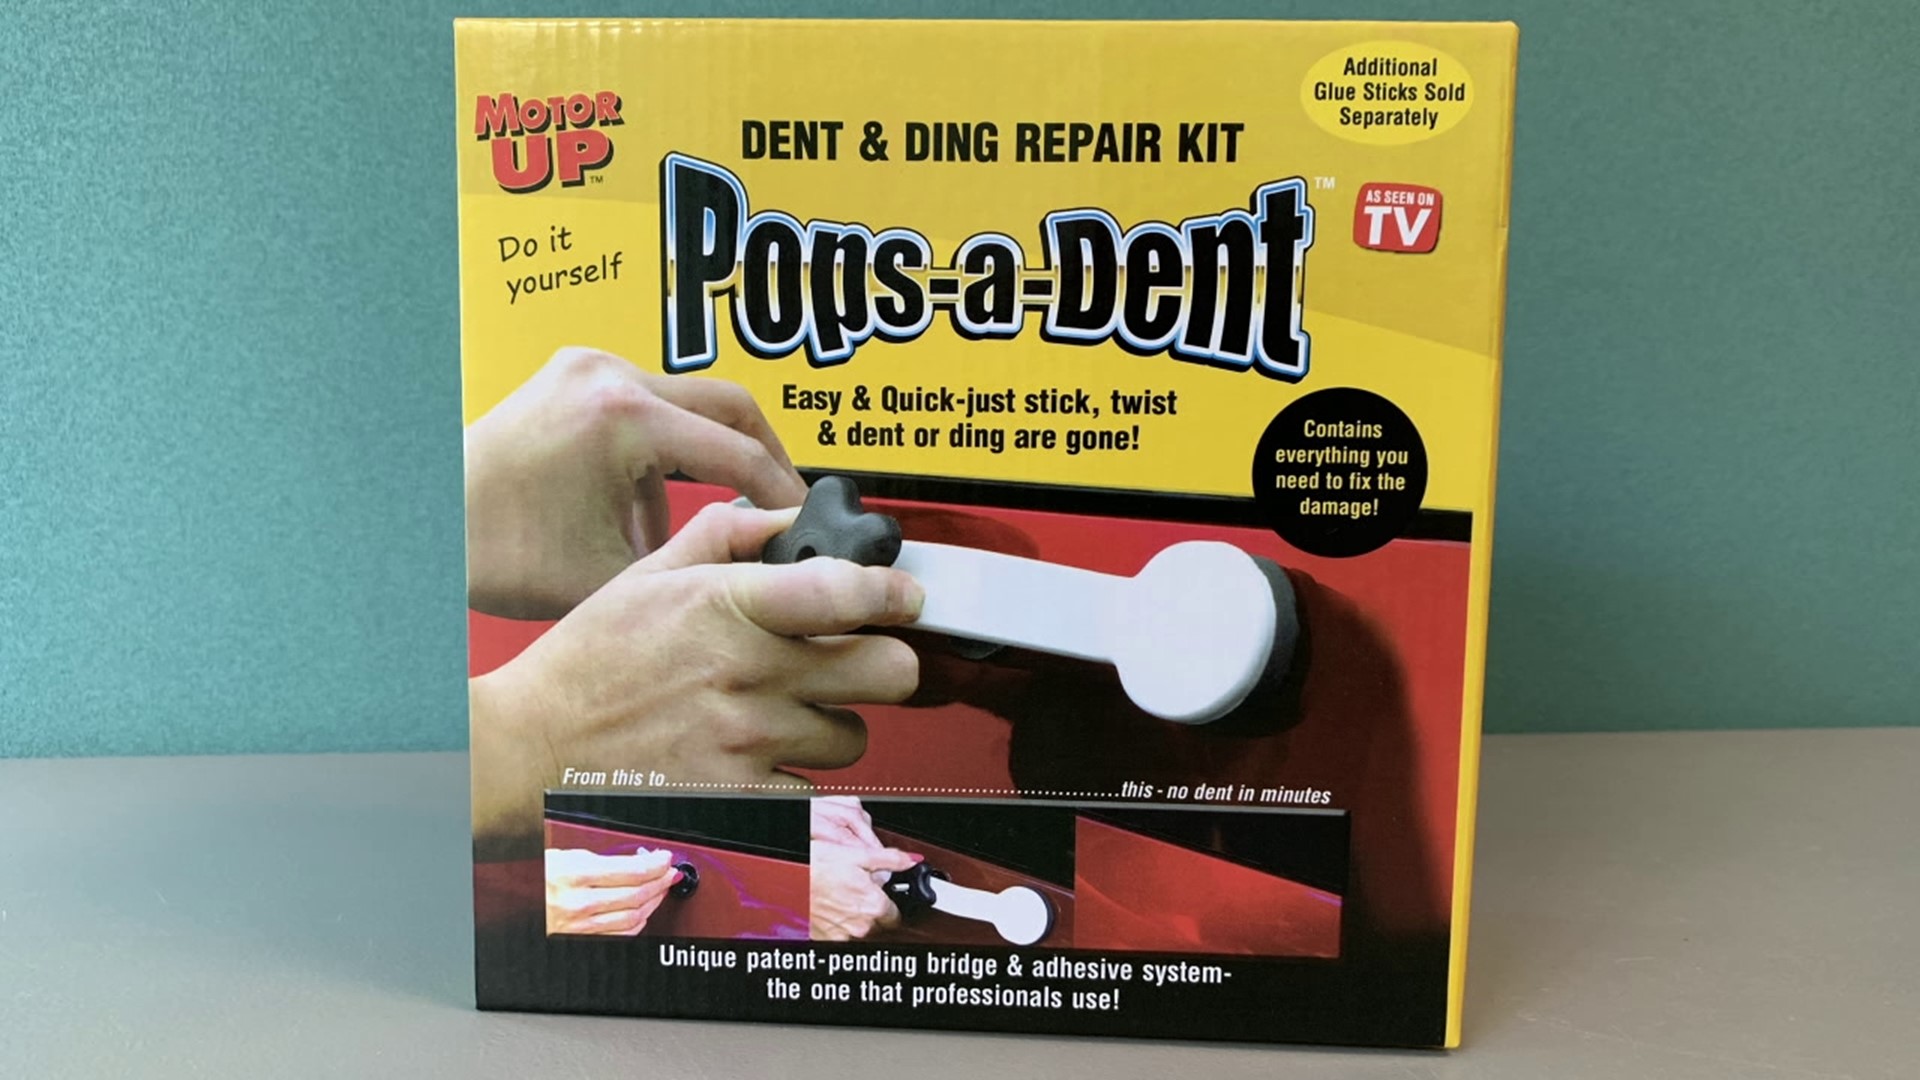 The maker claims, this kit will easily remove dents and dings from your vehicle caused by hail, other car doors, shopping carts, and more.